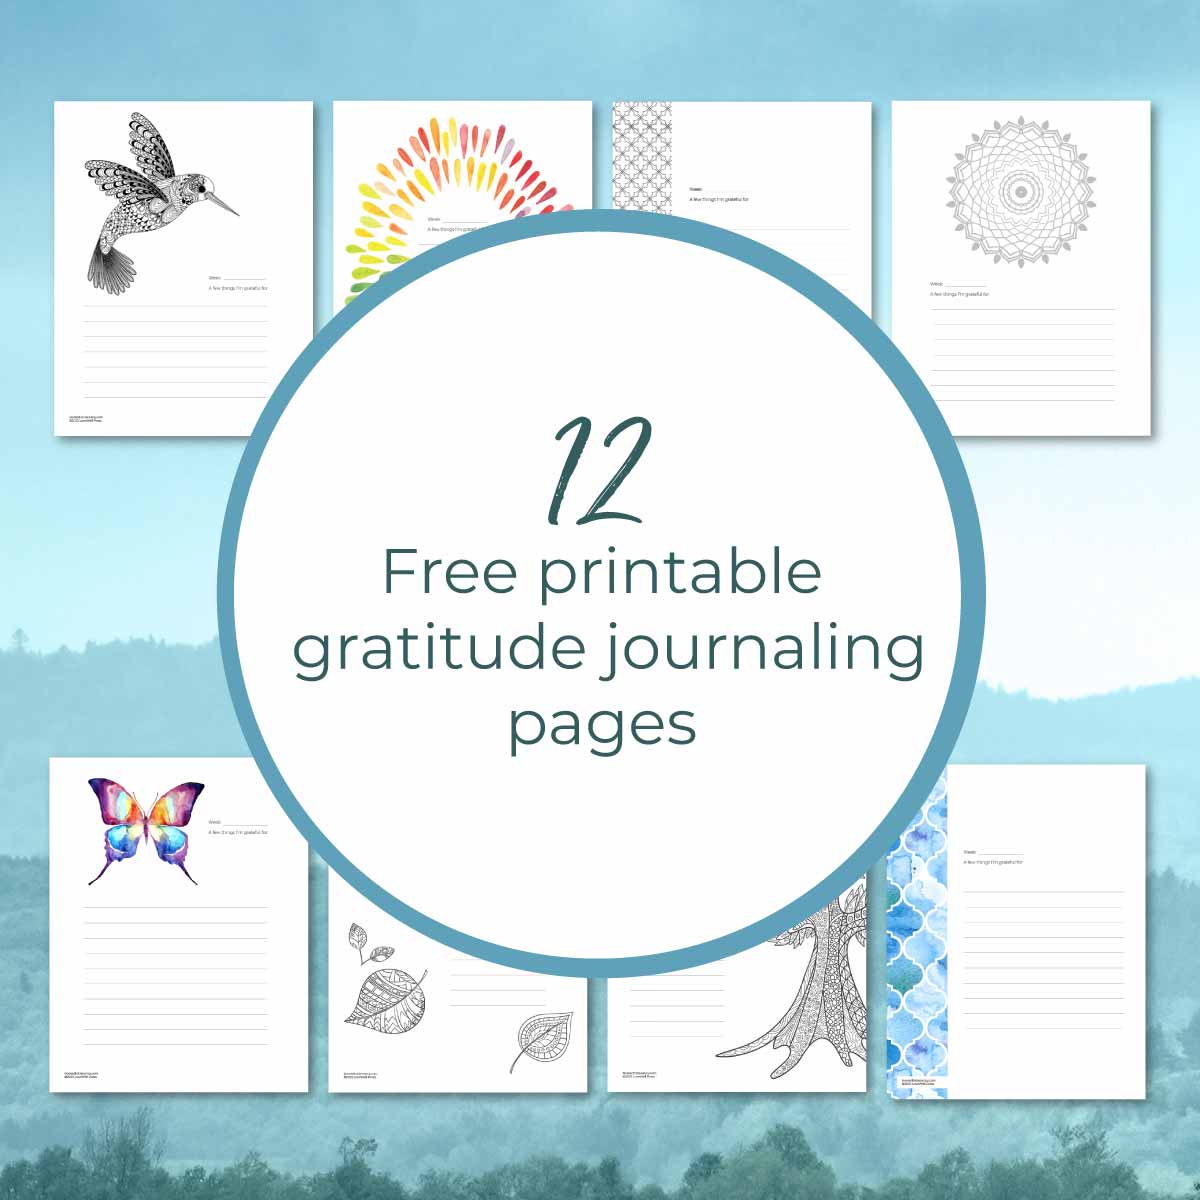 Free gratitude journaling pages to print